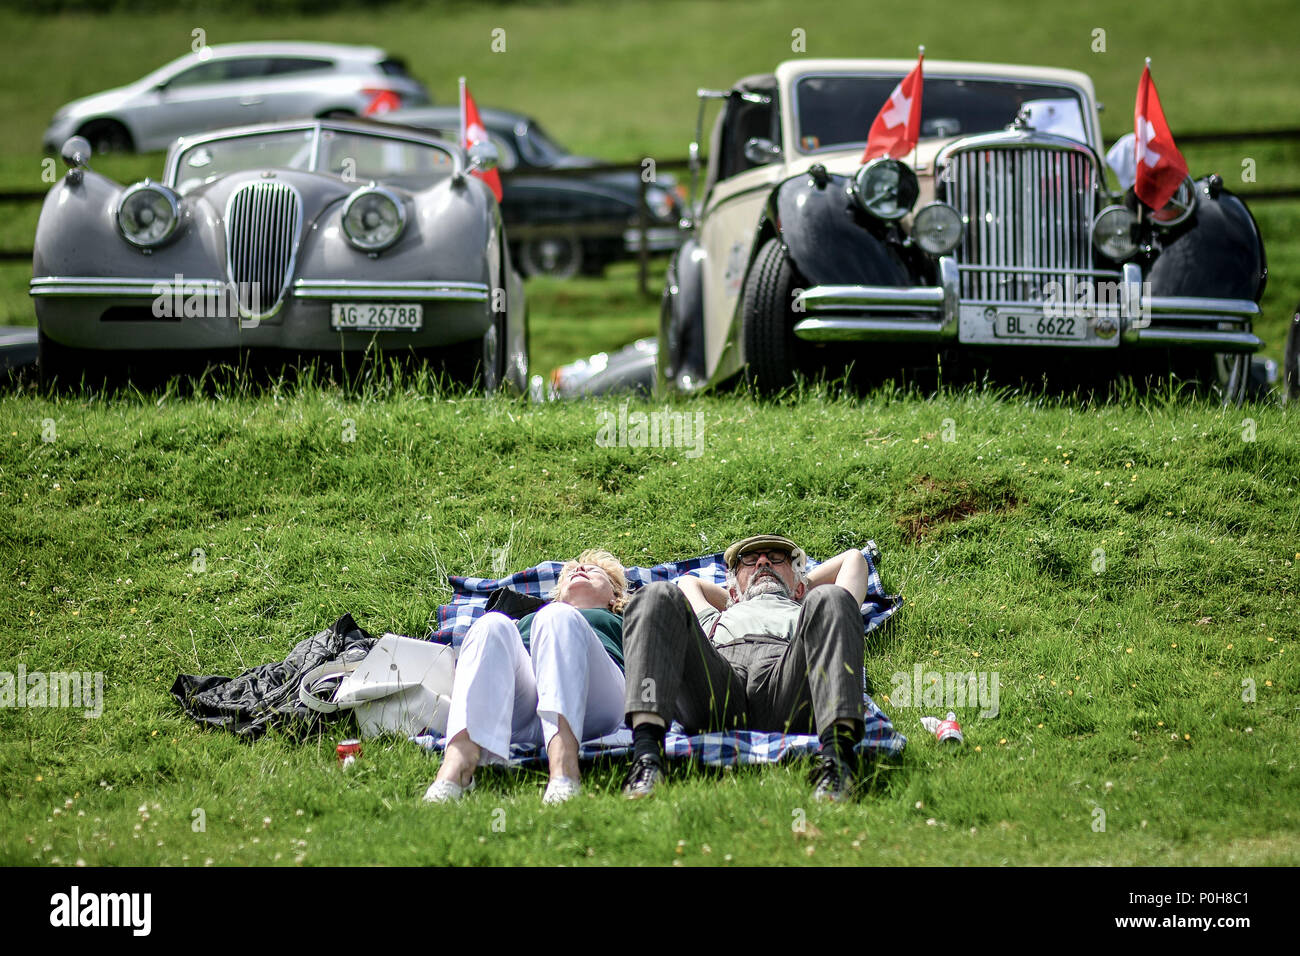 People relax by classic cars at the XK70 Jaguar Festival at Shelsley Walsh, Worcestershire, which is celebrating its 70th anniversary of the XK engine, which powered the vast majority of Jaguars produced between 1950 and 1986. Stock Photo